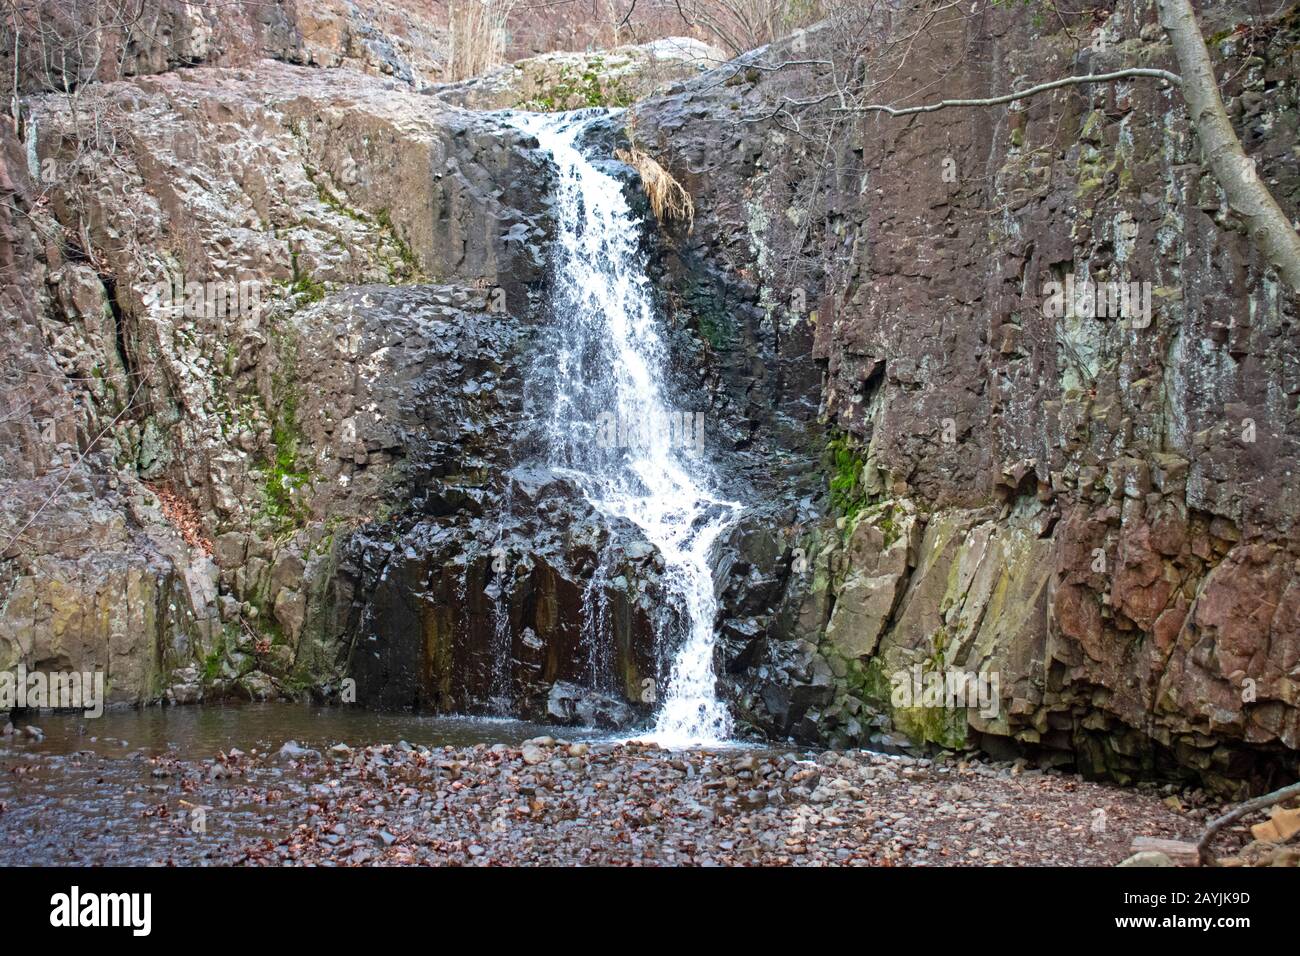 Hemlock Falls, a small waterfall in South Mountain Reservation and part of the Watchung Mountains, in Essex County, New Jersey, USA. -01 Stock Photo